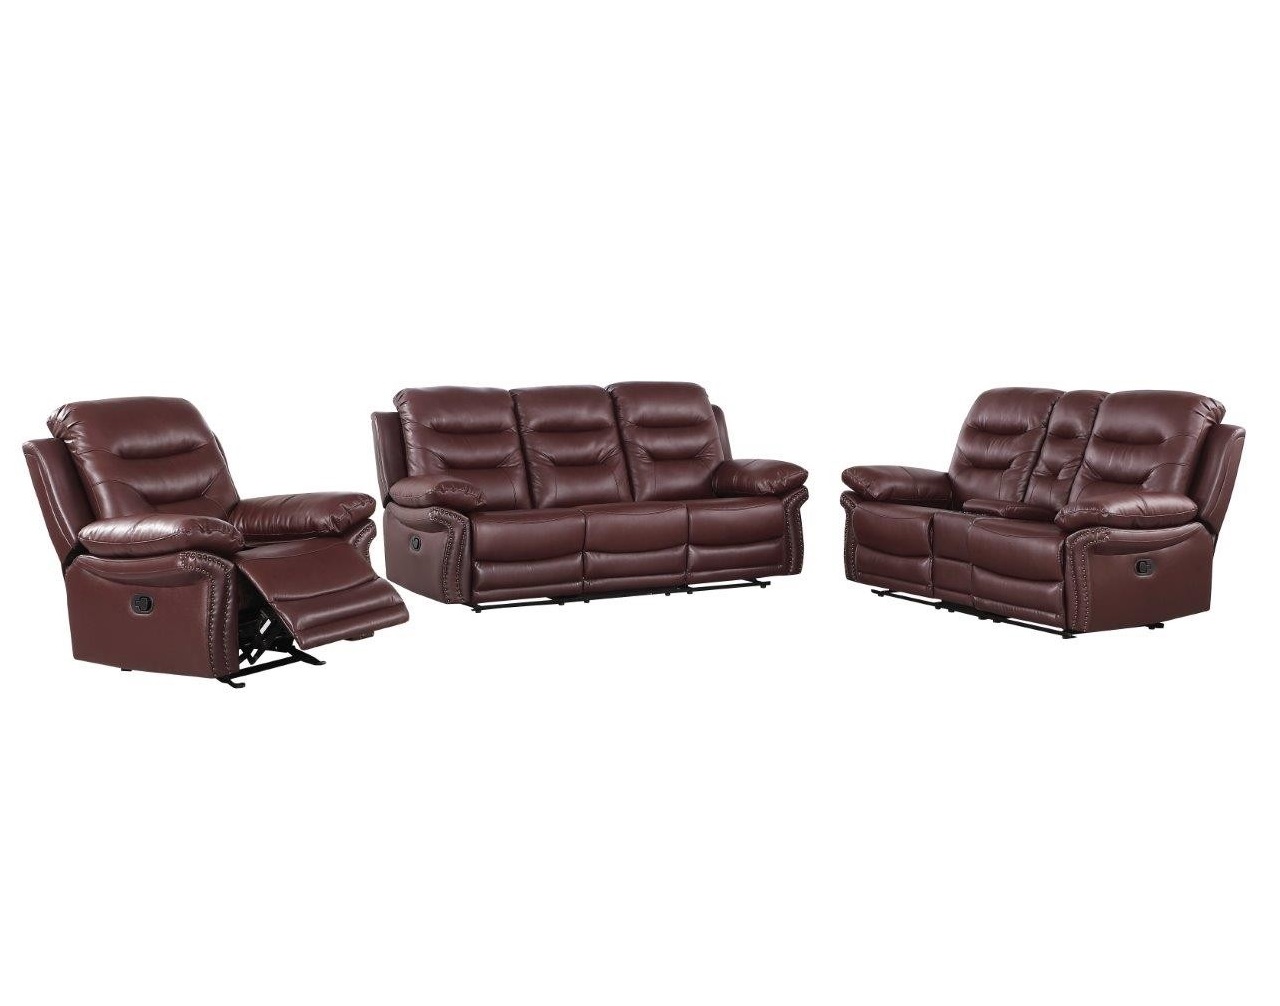 Three Piece Indoor Burgundy Faux Leather Five Person Seating Set-343906-1